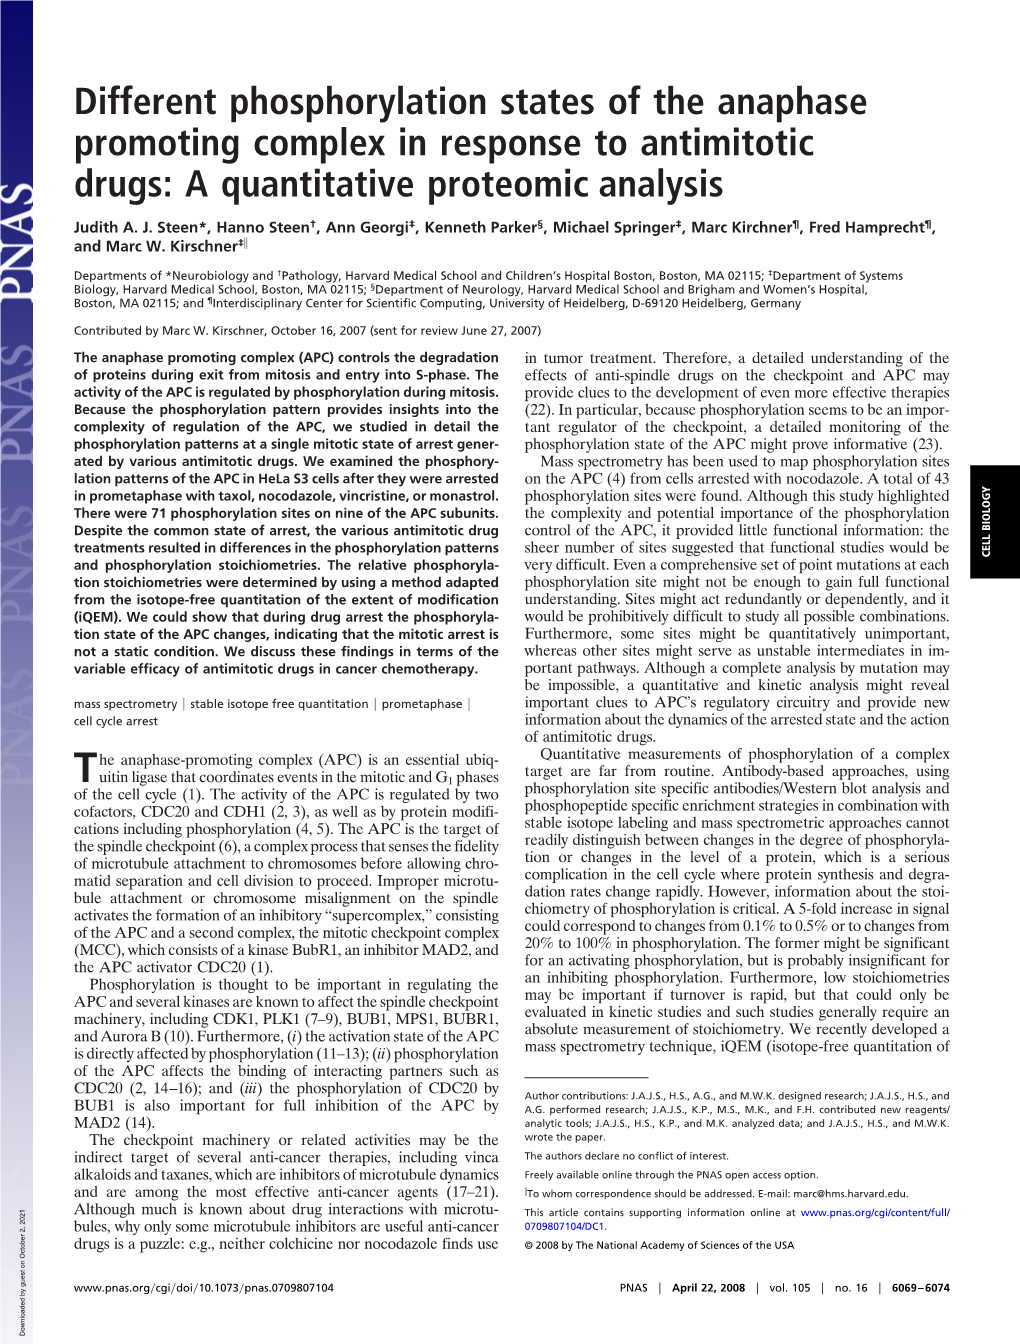 Different Phosphorylation States of the Anaphase Promoting Complex in Response to Antimitotic Drugs: a Quantitative Proteomic Analysis